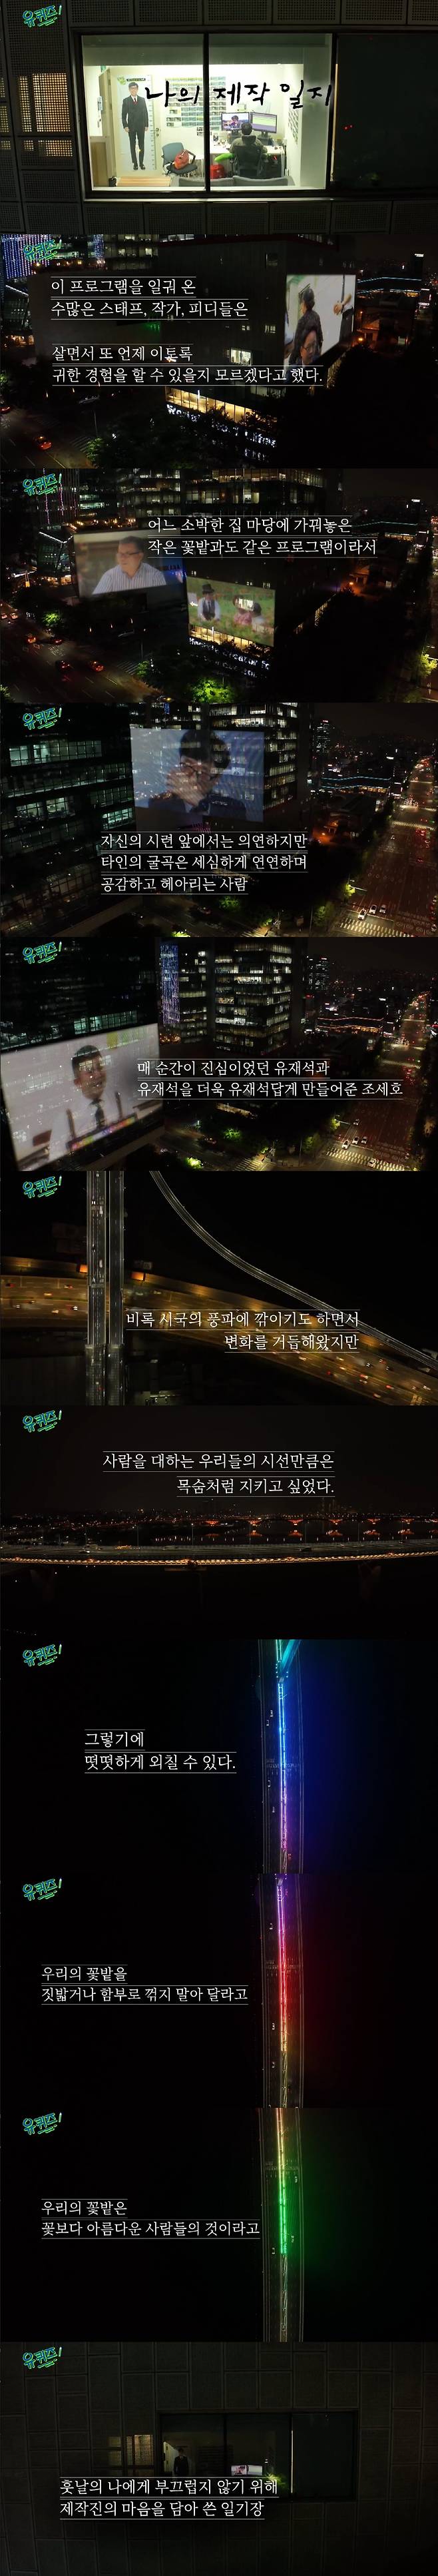 Yoon Seak-ryul The TVN signage entertainment You Quiz on the Block, which is at the center of political controversy with the appearance of the 20th President-elect, delivered the official position through the epilogue.You Quiz on the Block, which was broadcast on the 27th, unveiled Your Diary, which was featured by Kim Dae-jin, Korean classical translator Jung Young-mi and actor Park Bo-young as his own.Especially in the epilogue which was broadcasted on the day, the production team attracted a lot of attention by conveying a message that was considering the political controversy which was hot in the entertainment industry for one week.You Quiz on the Block carefully edited the stories of the parents of TVNs parent company CJ ENM building and the You Quiz on the Block to edit the impressions, empathy and laughter through the theme of My production diary.The production team said, It is my production diary that I have to leave my body on the wheel as if it is nothing after the last few weeks like a storm. This program, which started on a hot summer day in 2018, was a pro who wandered freely in search of a gem-like life on the street.I was really happy to see a life like a pearl shining on the corner of the street rather than chasing a star in a high place. You Quiz was our life itself, and your joy and sorrow were our blues.Many staff, writers, and PDIs who have worked on this program said they do not know when and when they will be able to experience such a precious experience.It is a program like a small flower garden that is made in a simple house yard because it can contain a great history that ordinary people write down, so even if the weather is bad, even if the season changes, I have blossomed with my soul. In addition, there was a mention of MC Yo Jae-Suk and Jo Se-ho who led You Quiz on the Block.The production team said, I am in front of my own trials, but the bending of others is carefully linked, sympathetic and counting.You Quiz on the Block and I am sorry that I have been criticized for saying that Yo Jae-Suk and Yo Jae-Suk, which were sincere at every moment, are Jo Se-ho who made Yo Jae-Suk more like Yo Jae-Suk.Above all, the production team said, The trip between the two people has been changed, even though it has been cut down by the wind of the city, but we wanted to keep our eyes on people like our lives.When I faced unexpected results, I was agonized, reflective, and sick. Everyone would, but I worked with care, not inertia, for a week.Do not trample our flower gardens or break them down. Our flower gardens are more beautiful than flowers. Finally, the production team said, I will know after a while. He finished with a diary written with the heart of the production team in order not to be ashamed of me later.Earlier, You Quiz on the Block was a lot of controversy on the 20th when Yoon Seak-ryul appeared.MC Yoo Jae-Suk and Jo Se-ho also became aware of the fact that they learned on the day of recording on the appearance of Yoon Seok-ryul, adding to the inconvenience of viewers.In addition, suspicions grew even more as Kim Min-seok and Park Geun-hyung PD, who led the Yu Quiz on the Block just before the appearance of Yoon Seak-ryul, were added.After the broadcast, there was a proposal by President Moon Jae-in, Prime Minister Kim Bum-kyum, and Lee Jae-myeong, a standing advisor of the Democratic Party, but the fact that the production team refused all of them became more and more publicized for You Quiz on the Block.The production team did not disclose any position, and the controversy was amplified. On the 27th, only one week, the epilogue was controversial and attracted attention once again.